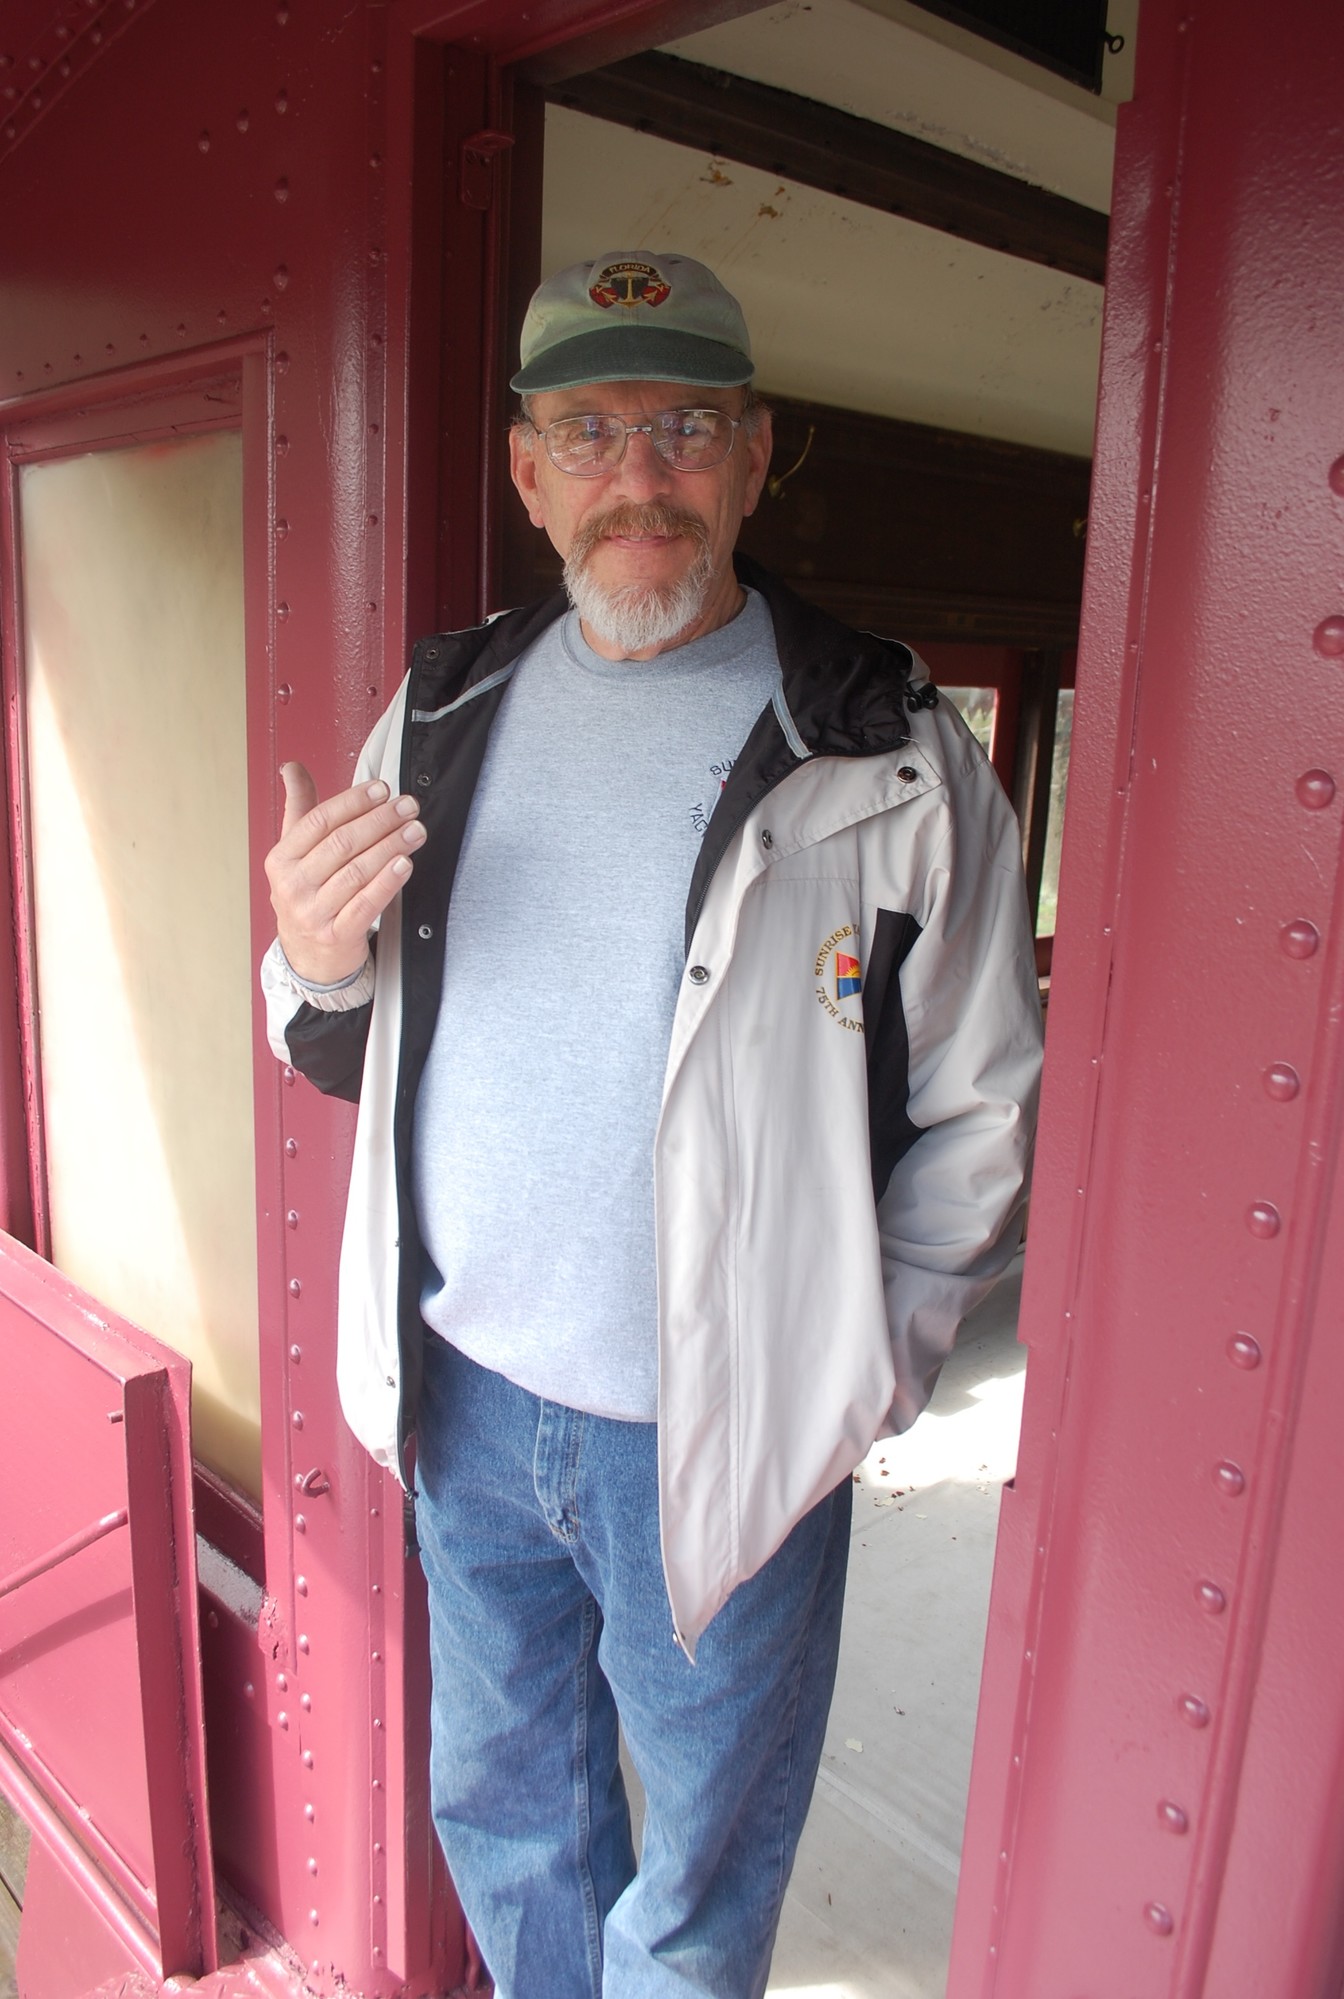 Bob Meagher is hoping to get the inside of the train fixed up by the end of the year to open it to the public.